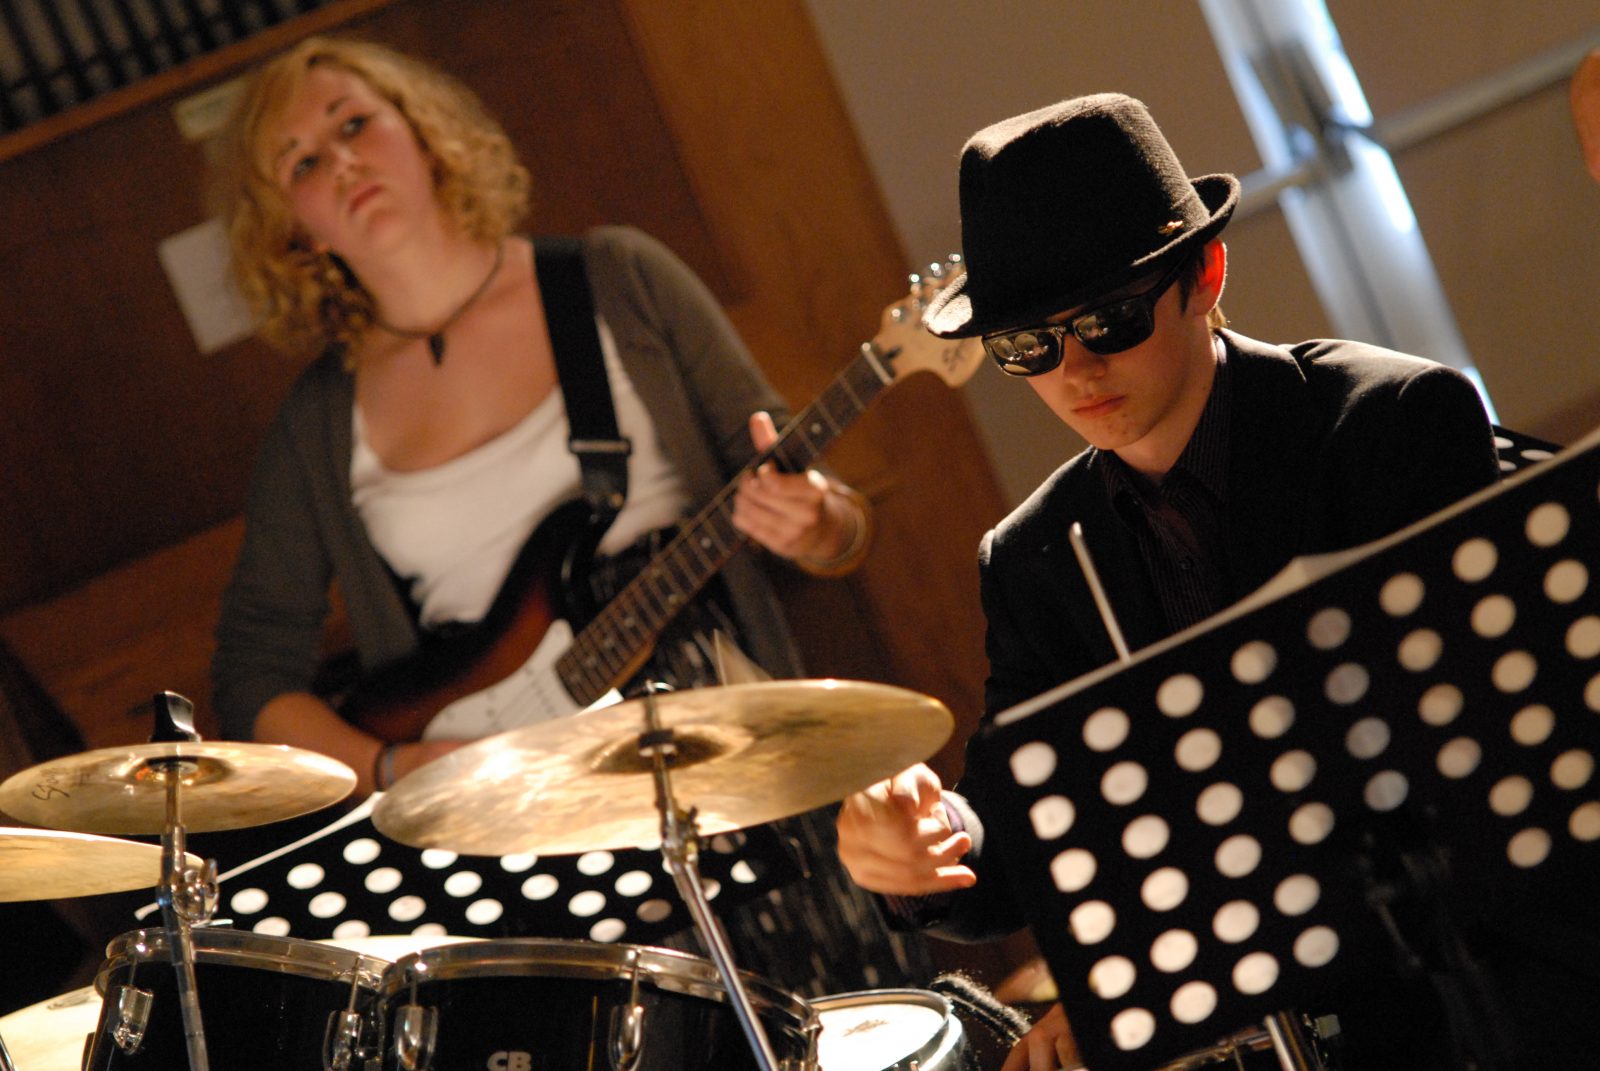 Bassist and drummer wearing sunglasses